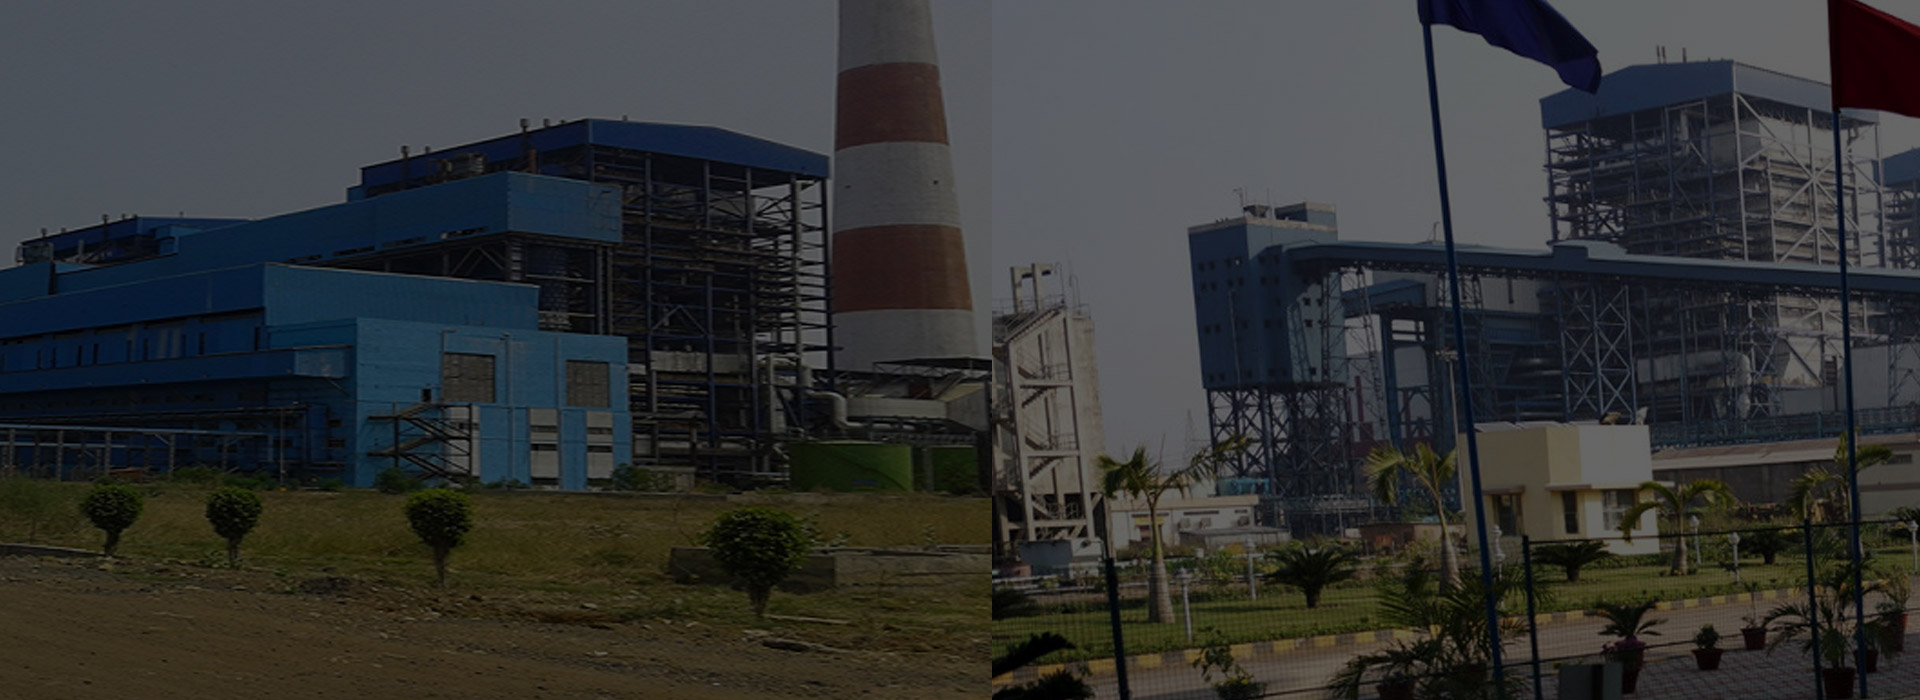 Commissioned power generating plants in Dhariwal, Maharashtra and Haldia, West Bengal, expanding the footprint of the power business.